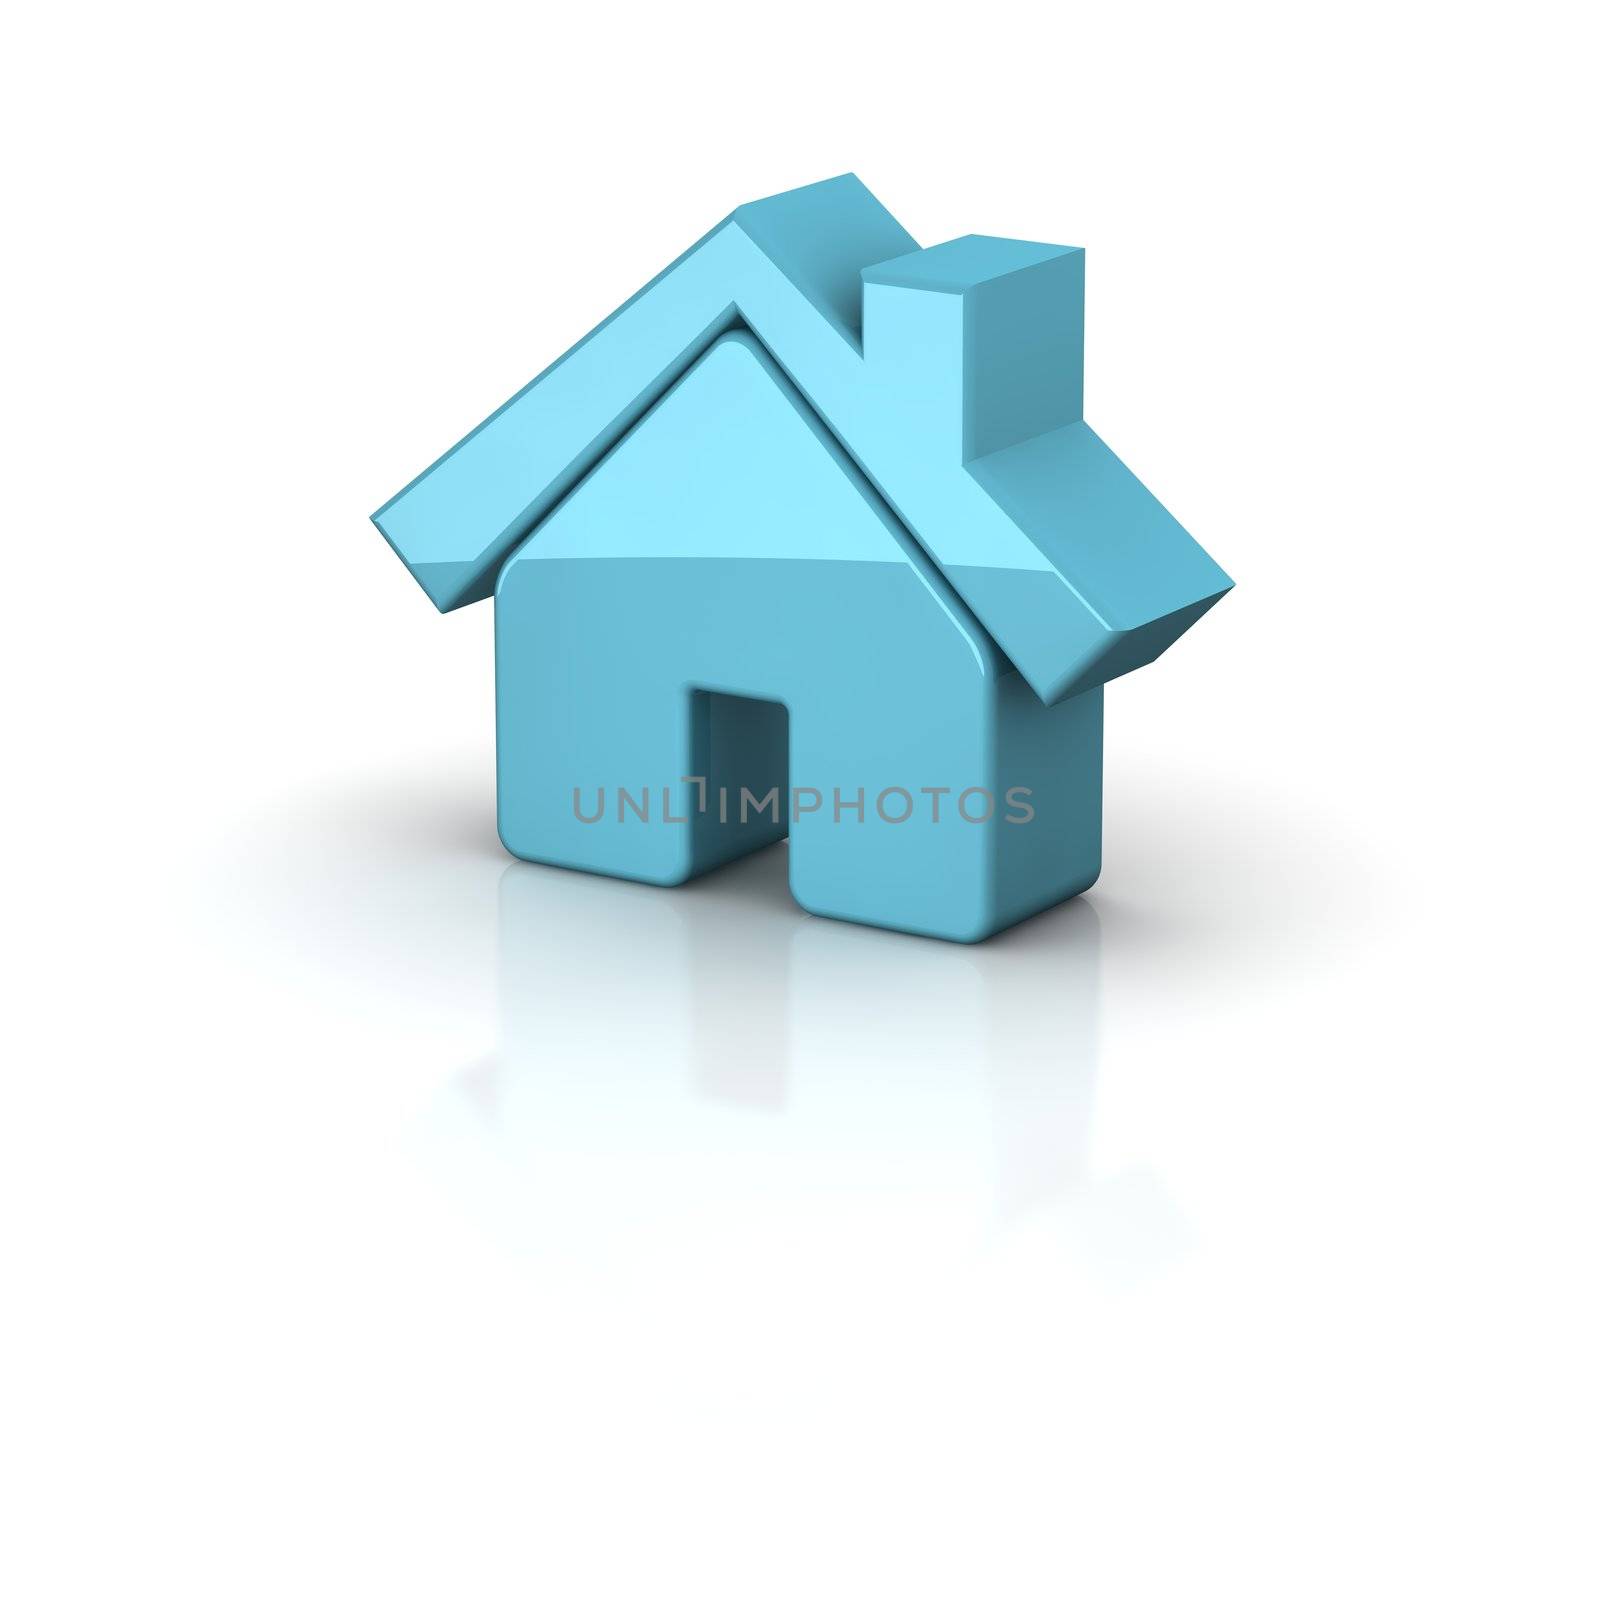 Shiny house icon. 3d rendered illustration.